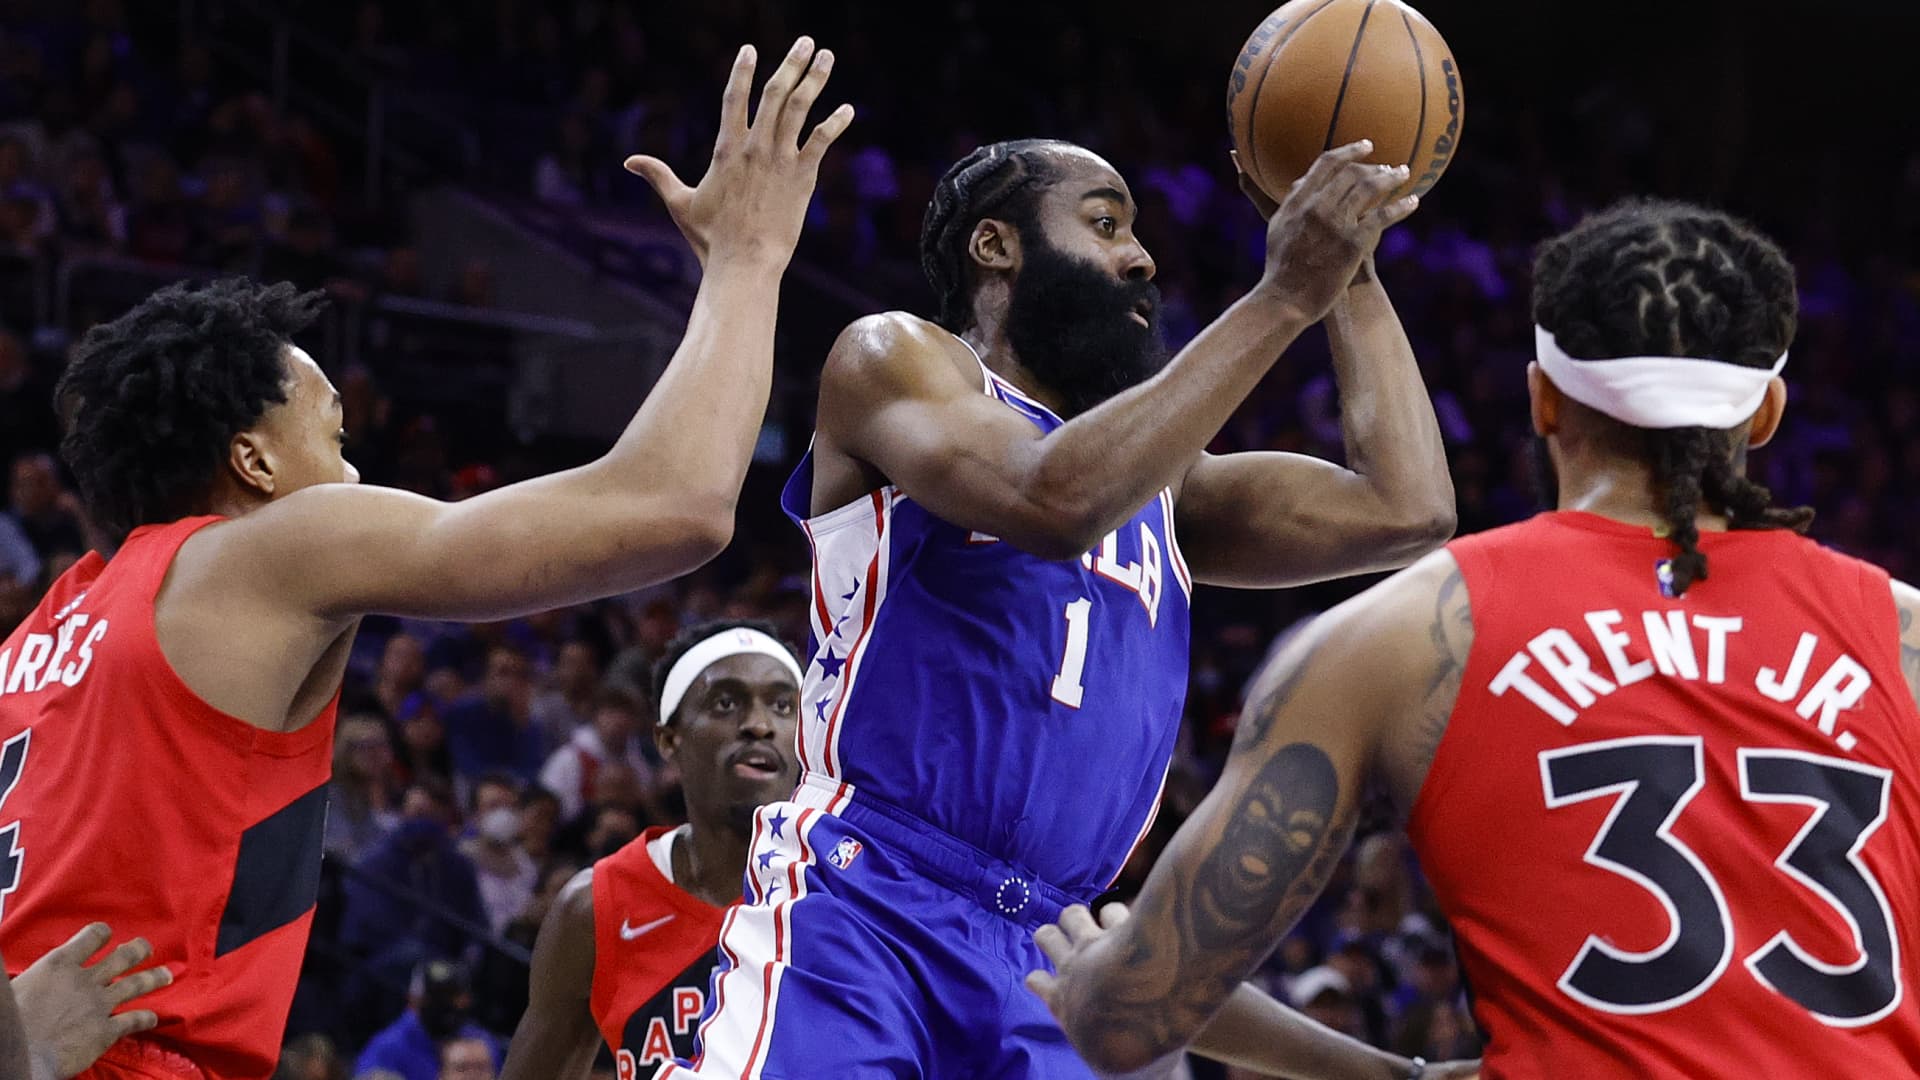 NBA star James Harden throws his support behind financial literacy